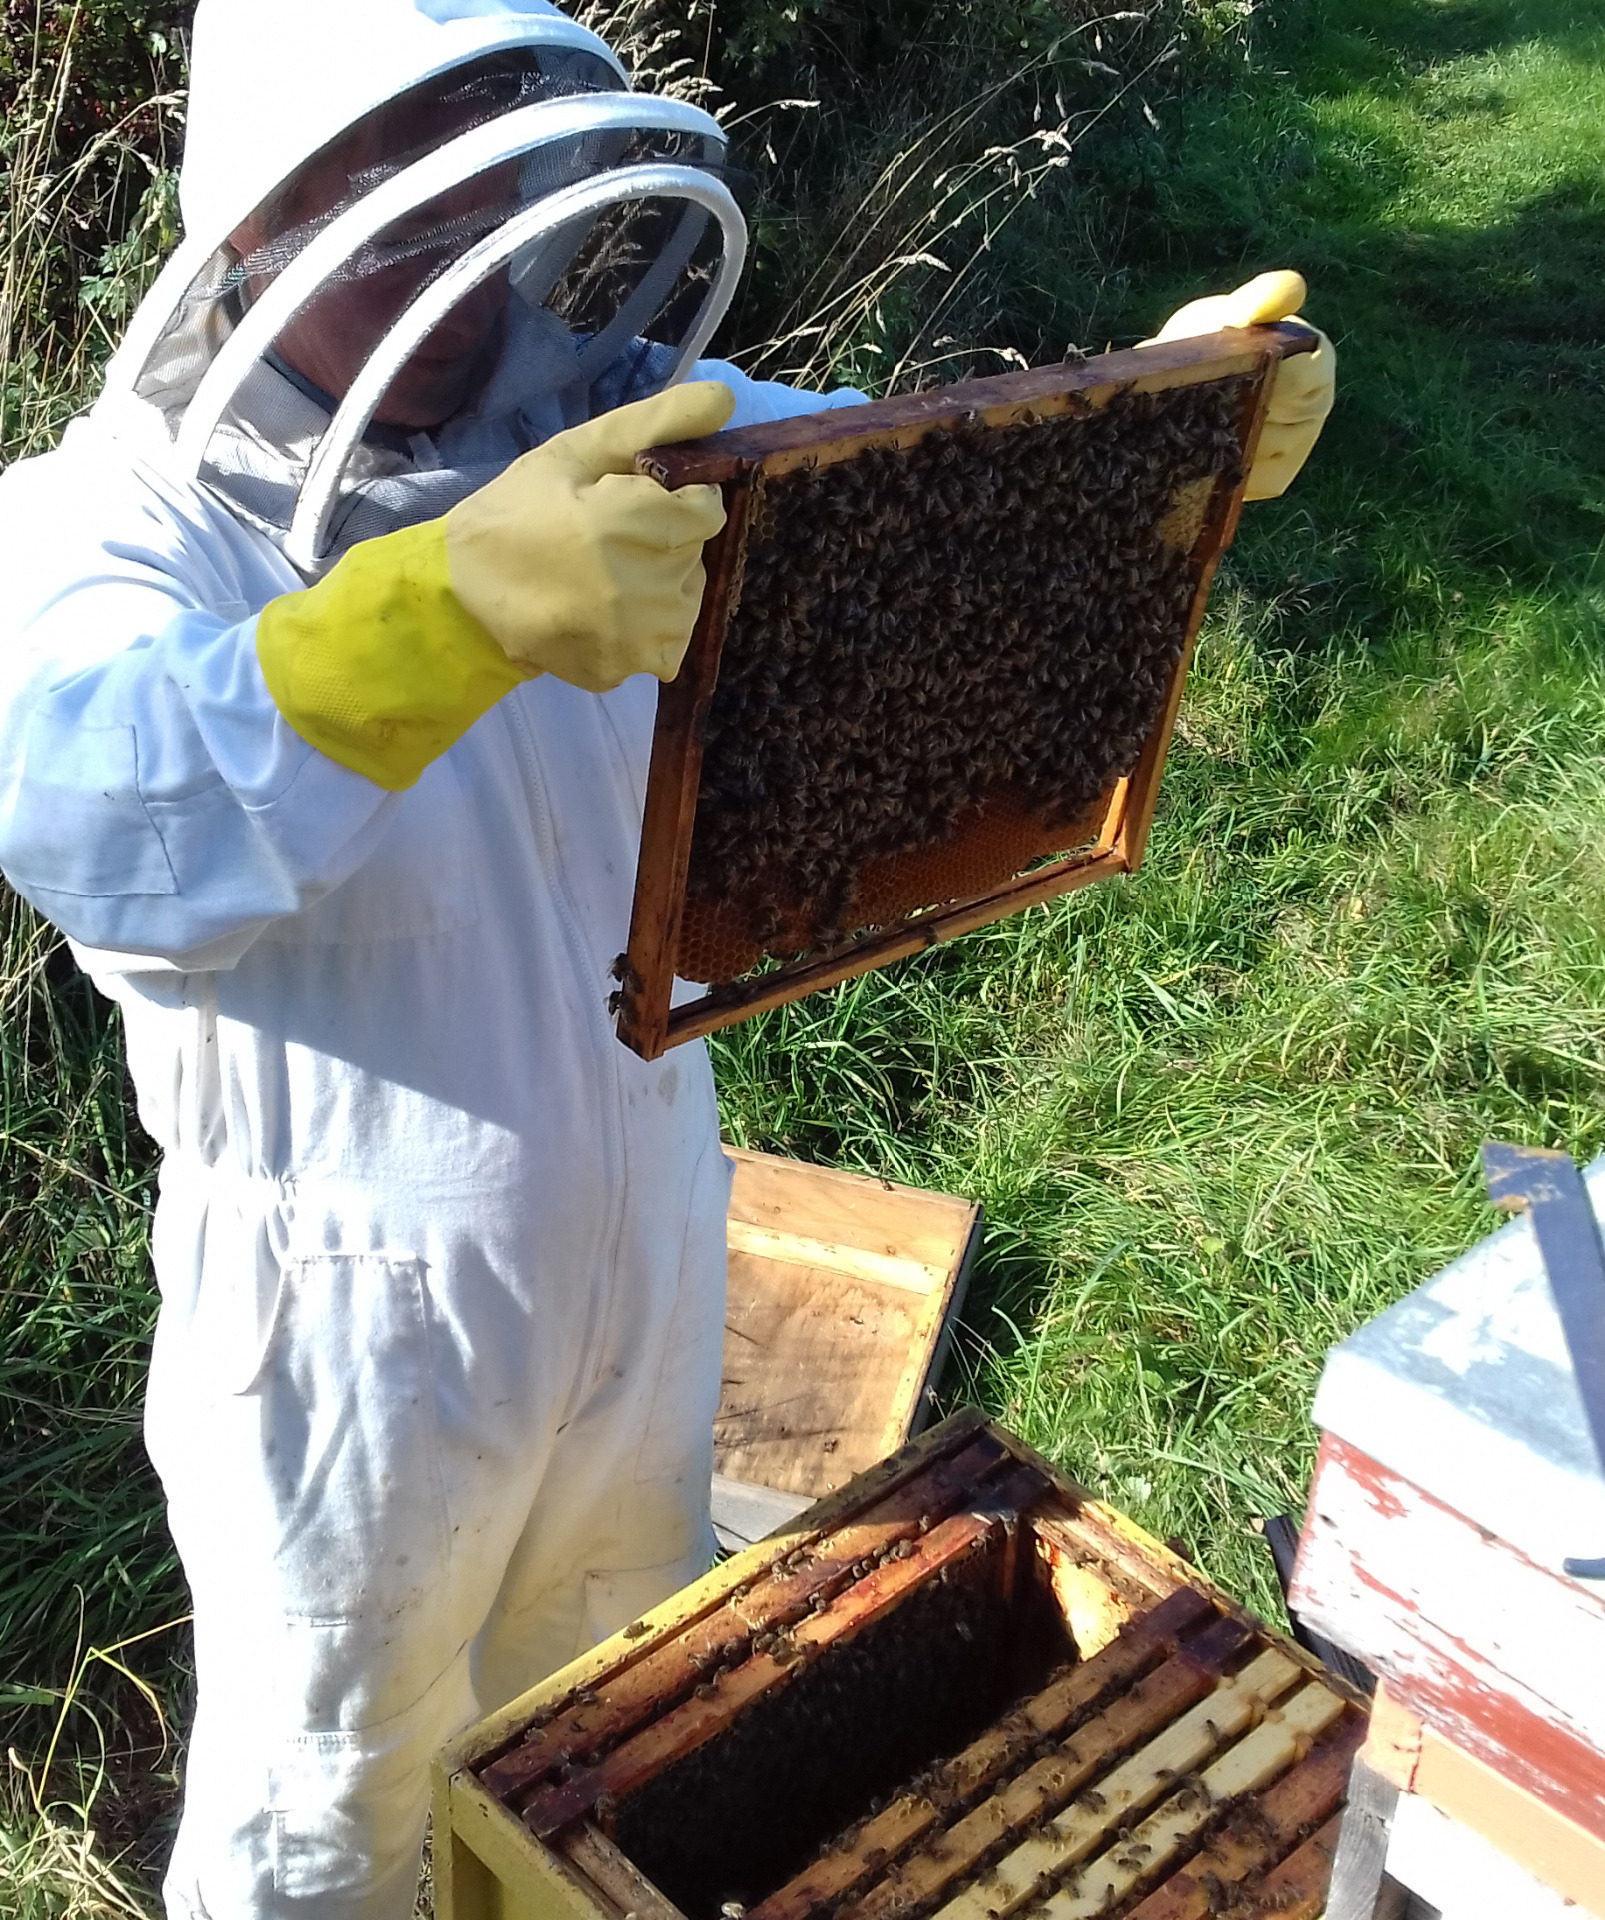 Arrange a colony visit with the Bee Farmer